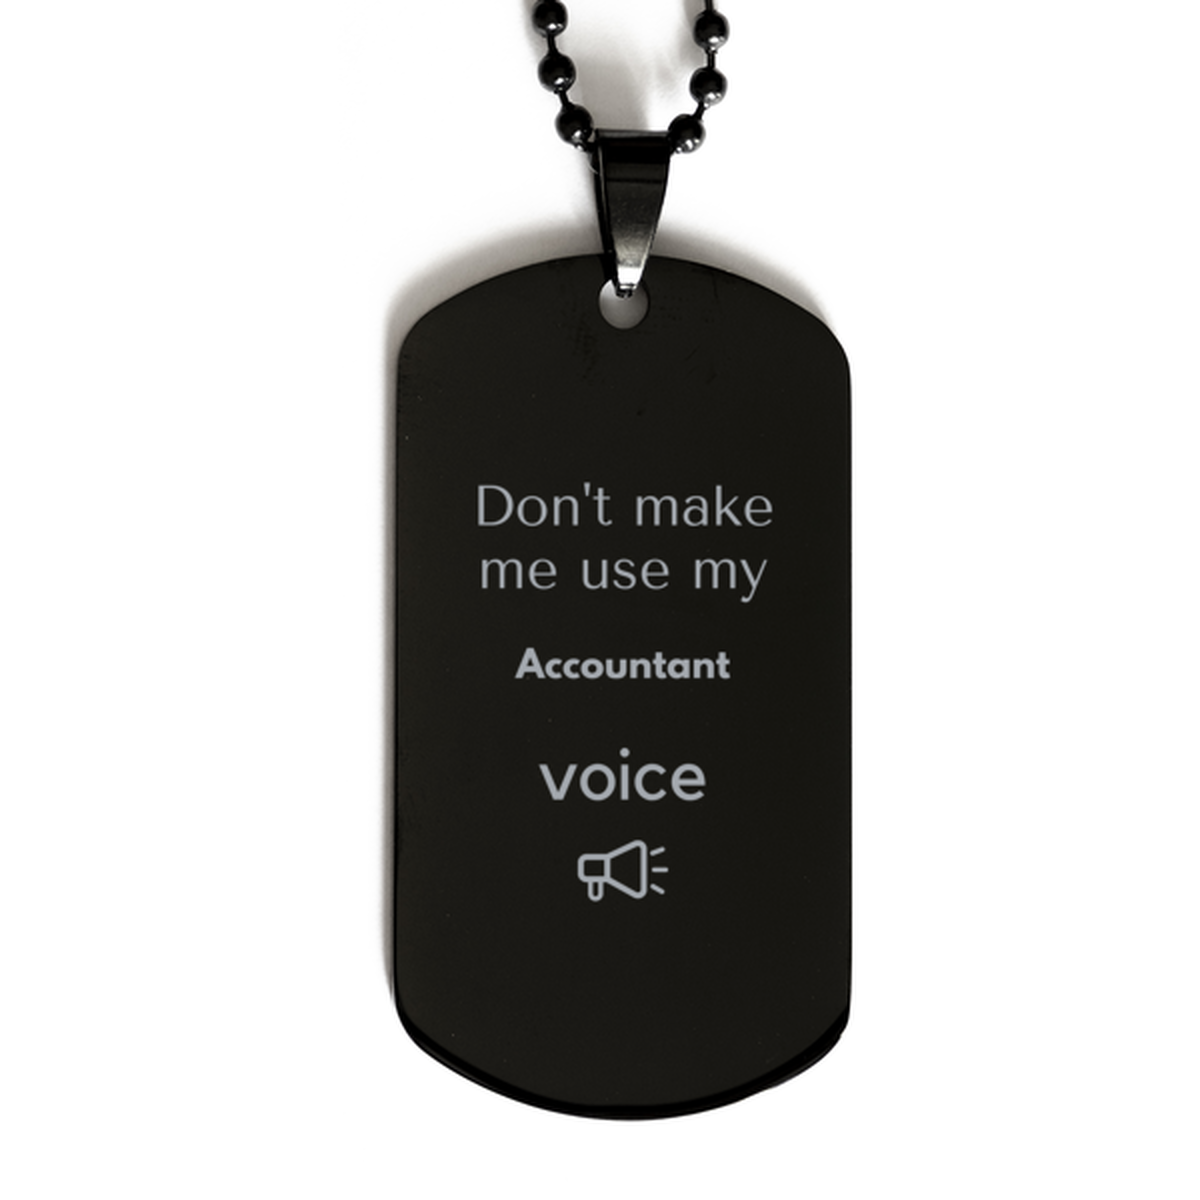 Don't make me use my Accountant voice, Sarcasm Accountant Gifts, Christmas Accountant Black Dog Tag Birthday Unique Gifts For Accountant Coworkers, Men, Women, Colleague, Friends